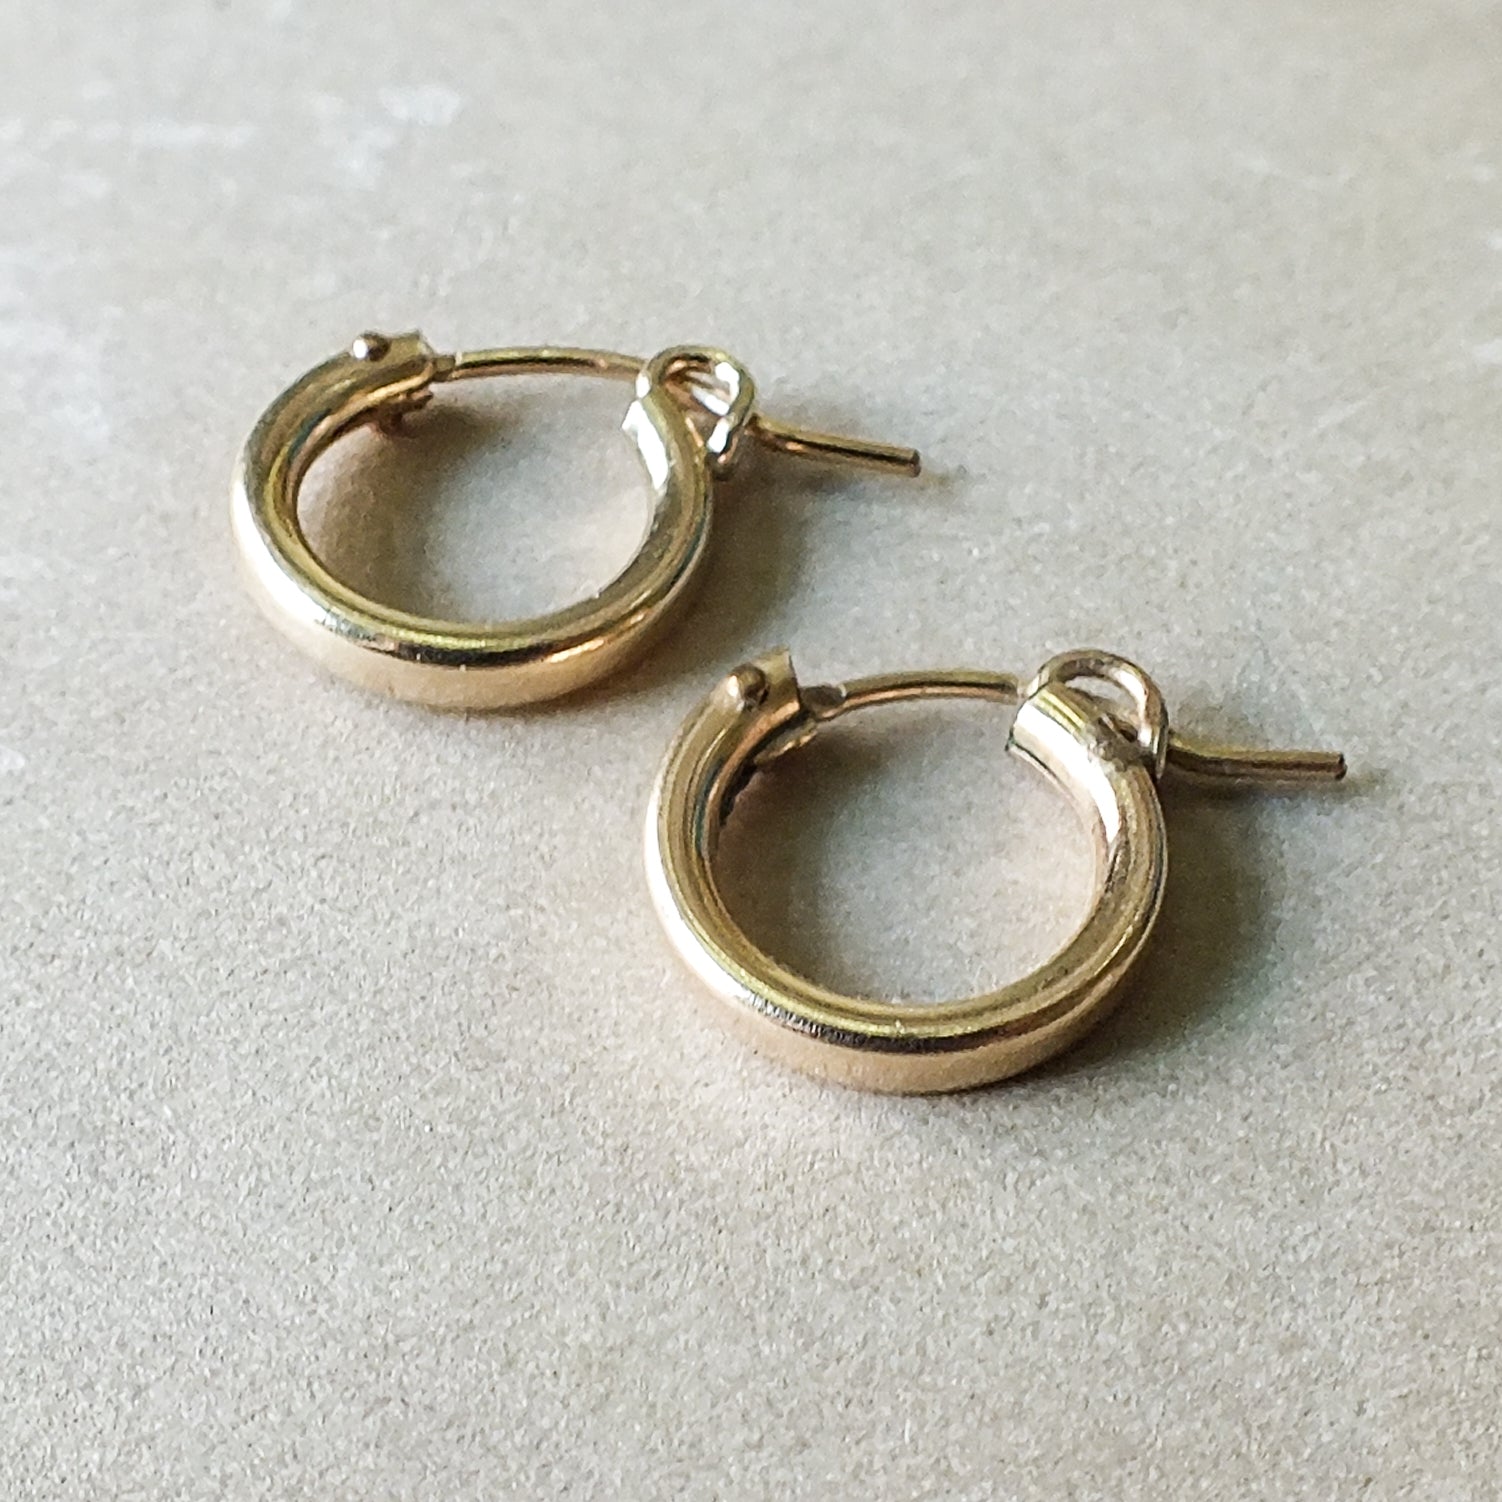 A pair of Becoming Jewelry Everyday Hoop Earrings, small on a light surface.